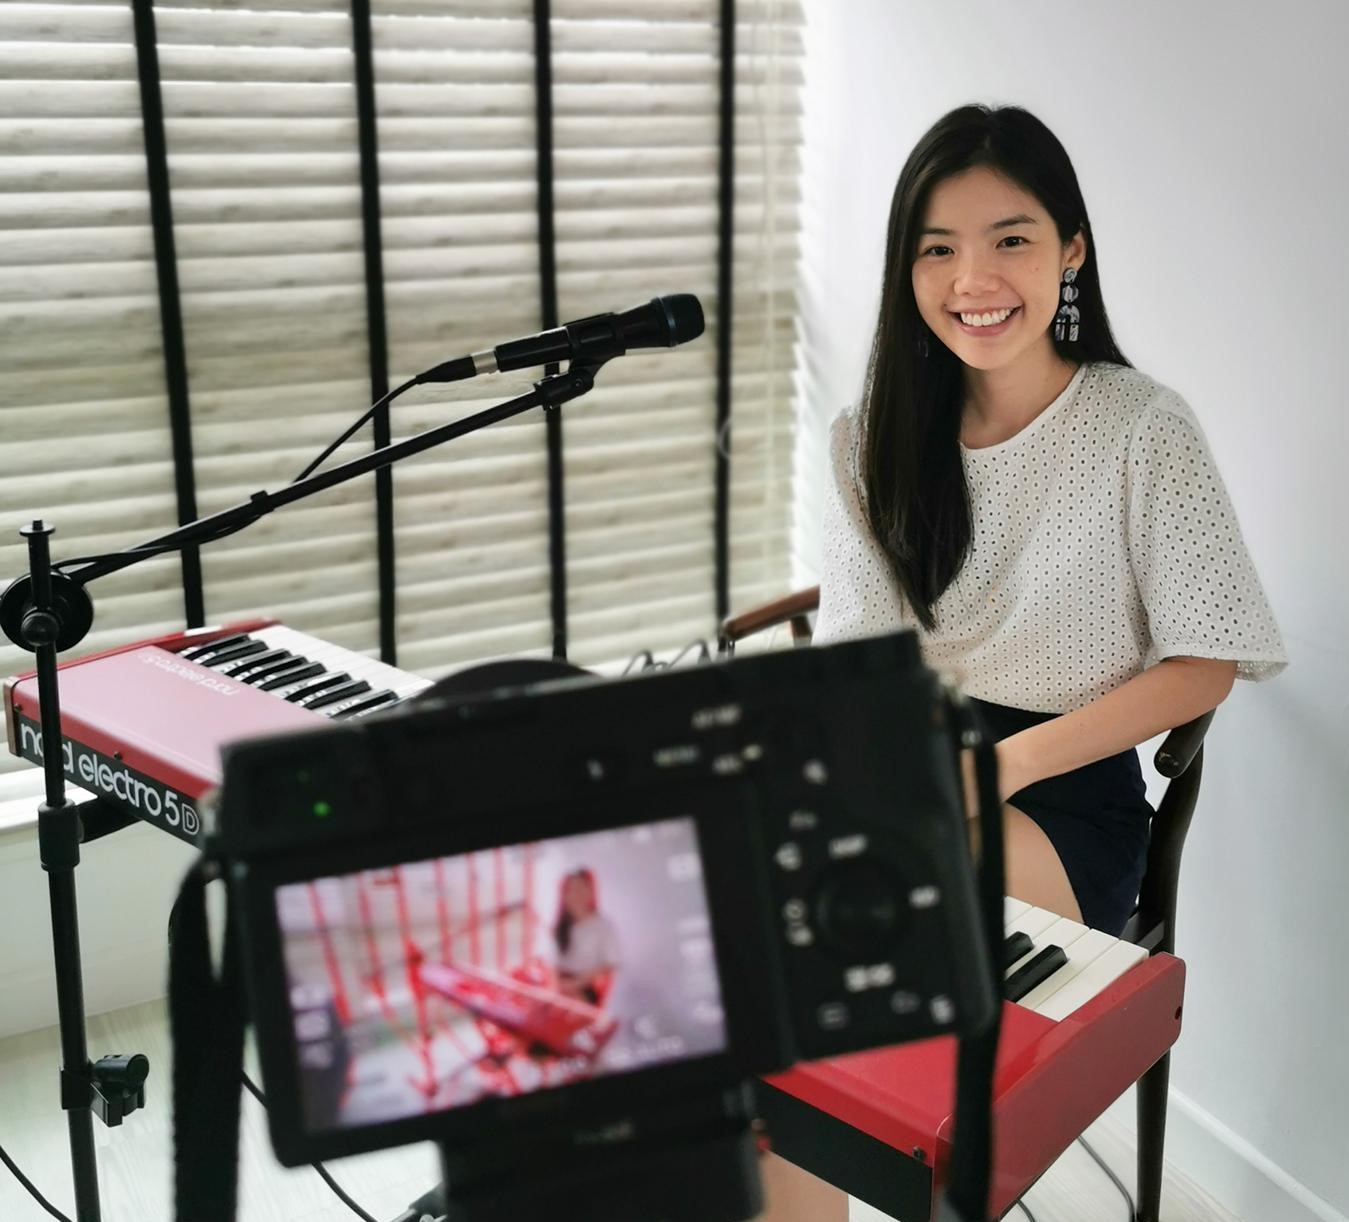 Priscilla Tan learnt to play the piano from the age of four and has been singing at events as a professional singer.